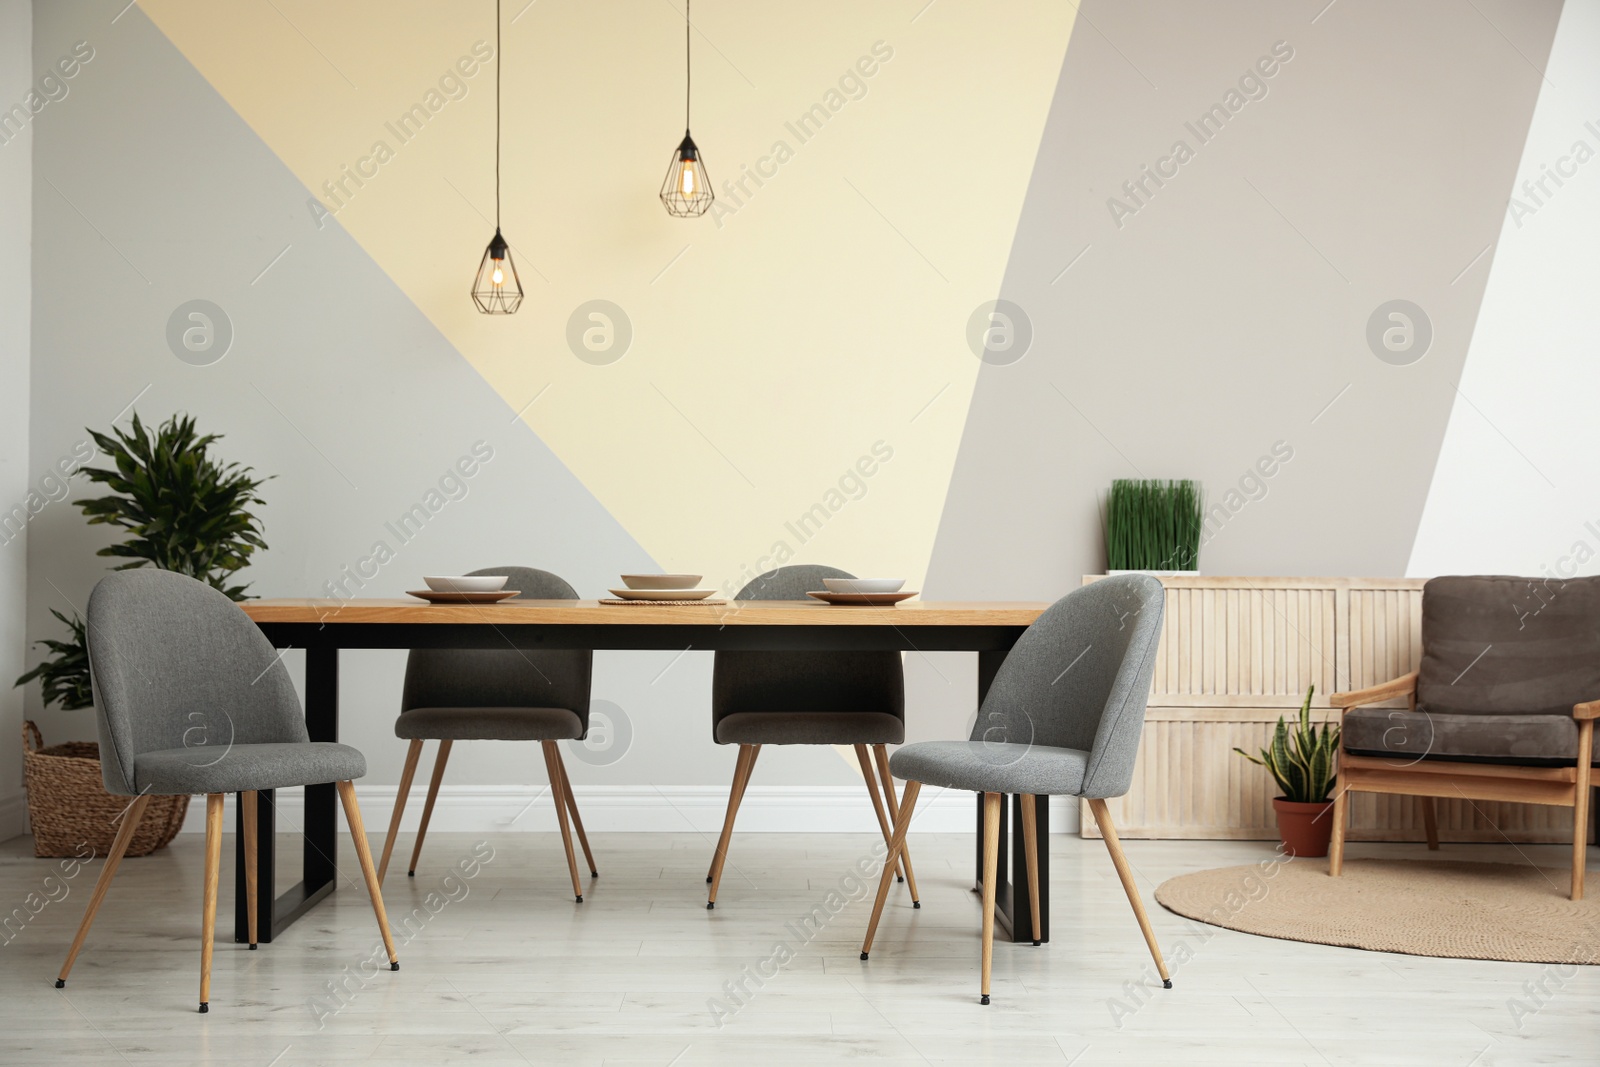 Photo of Modern wooden dining table in room interior